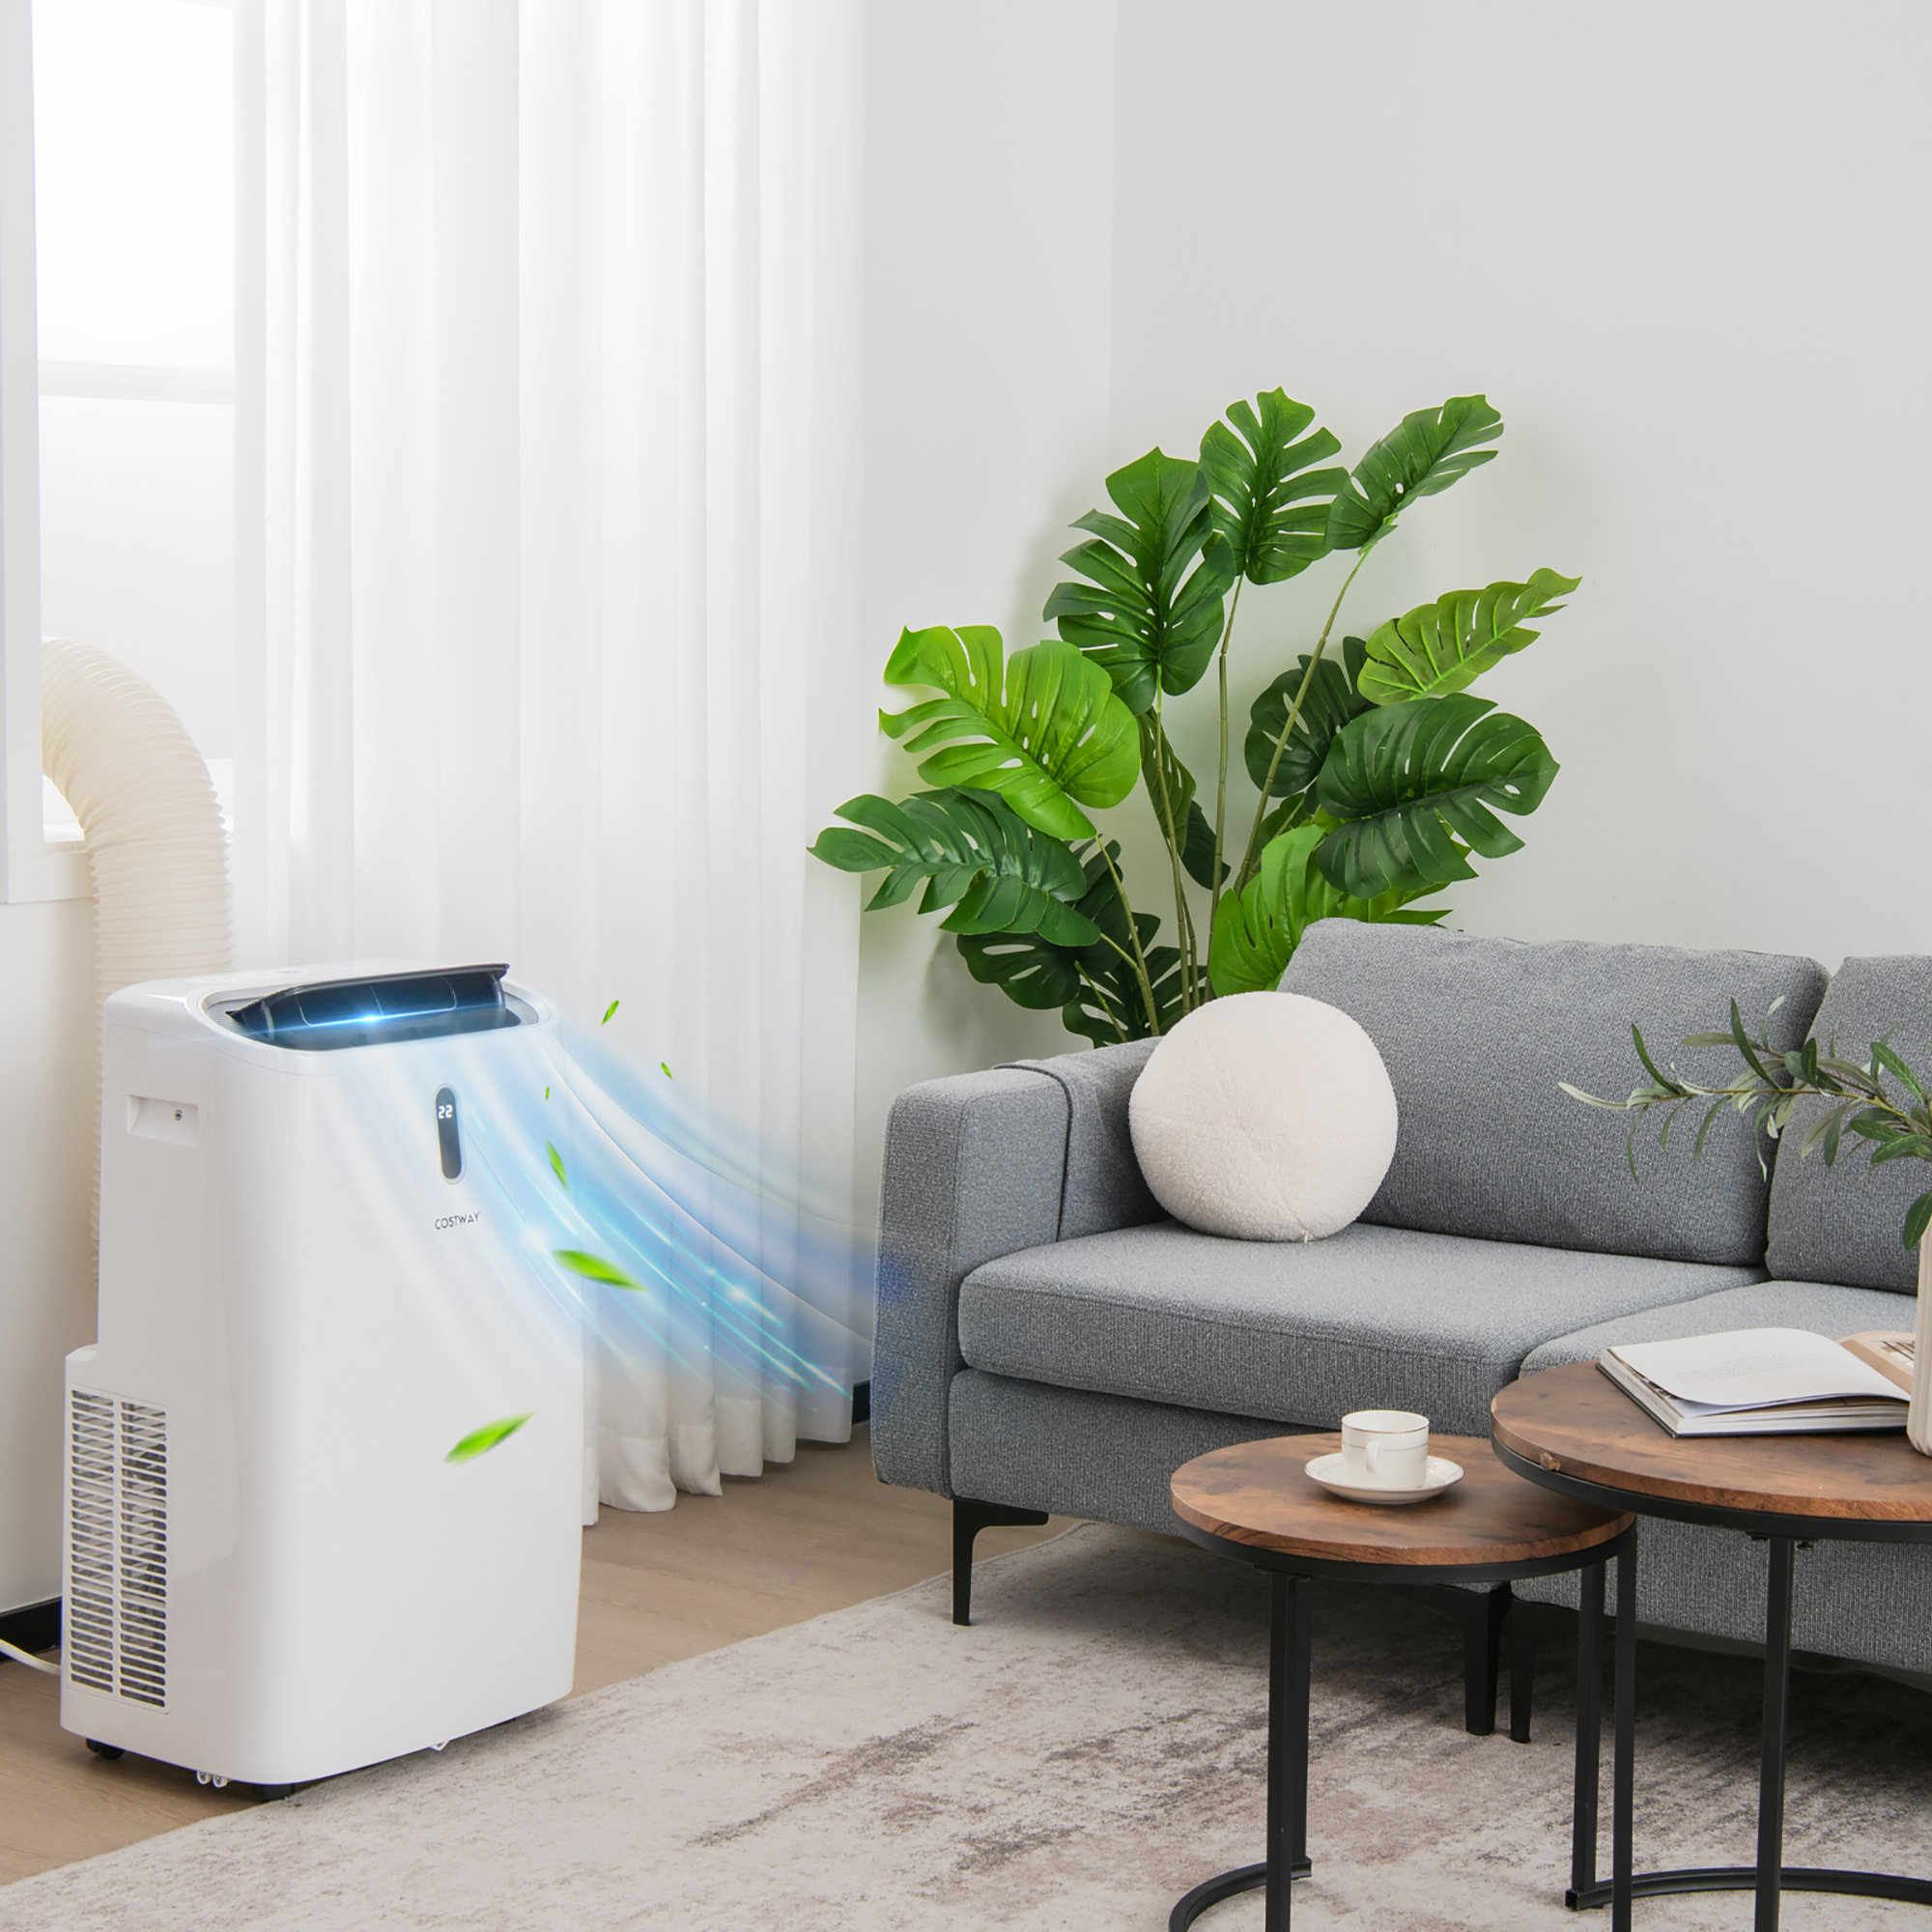 Costway 12000 BTU Wi-Fi Connected Portable Air Conditioner with